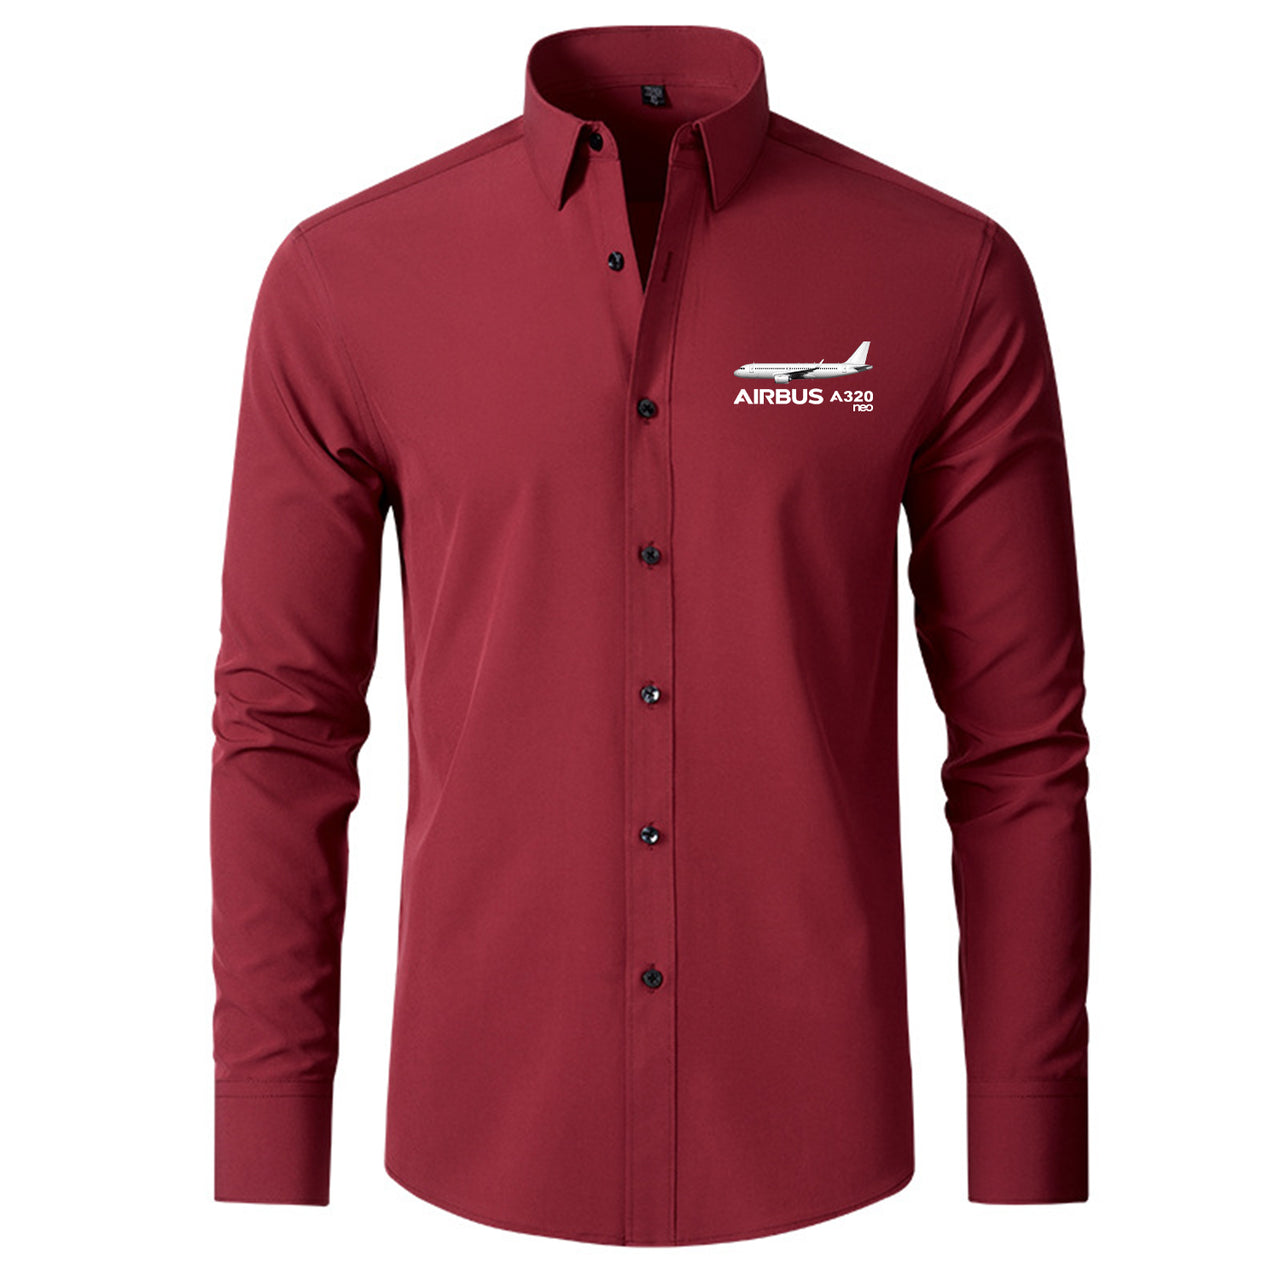 The Airbus A320Neo Designed Long Sleeve Shirts